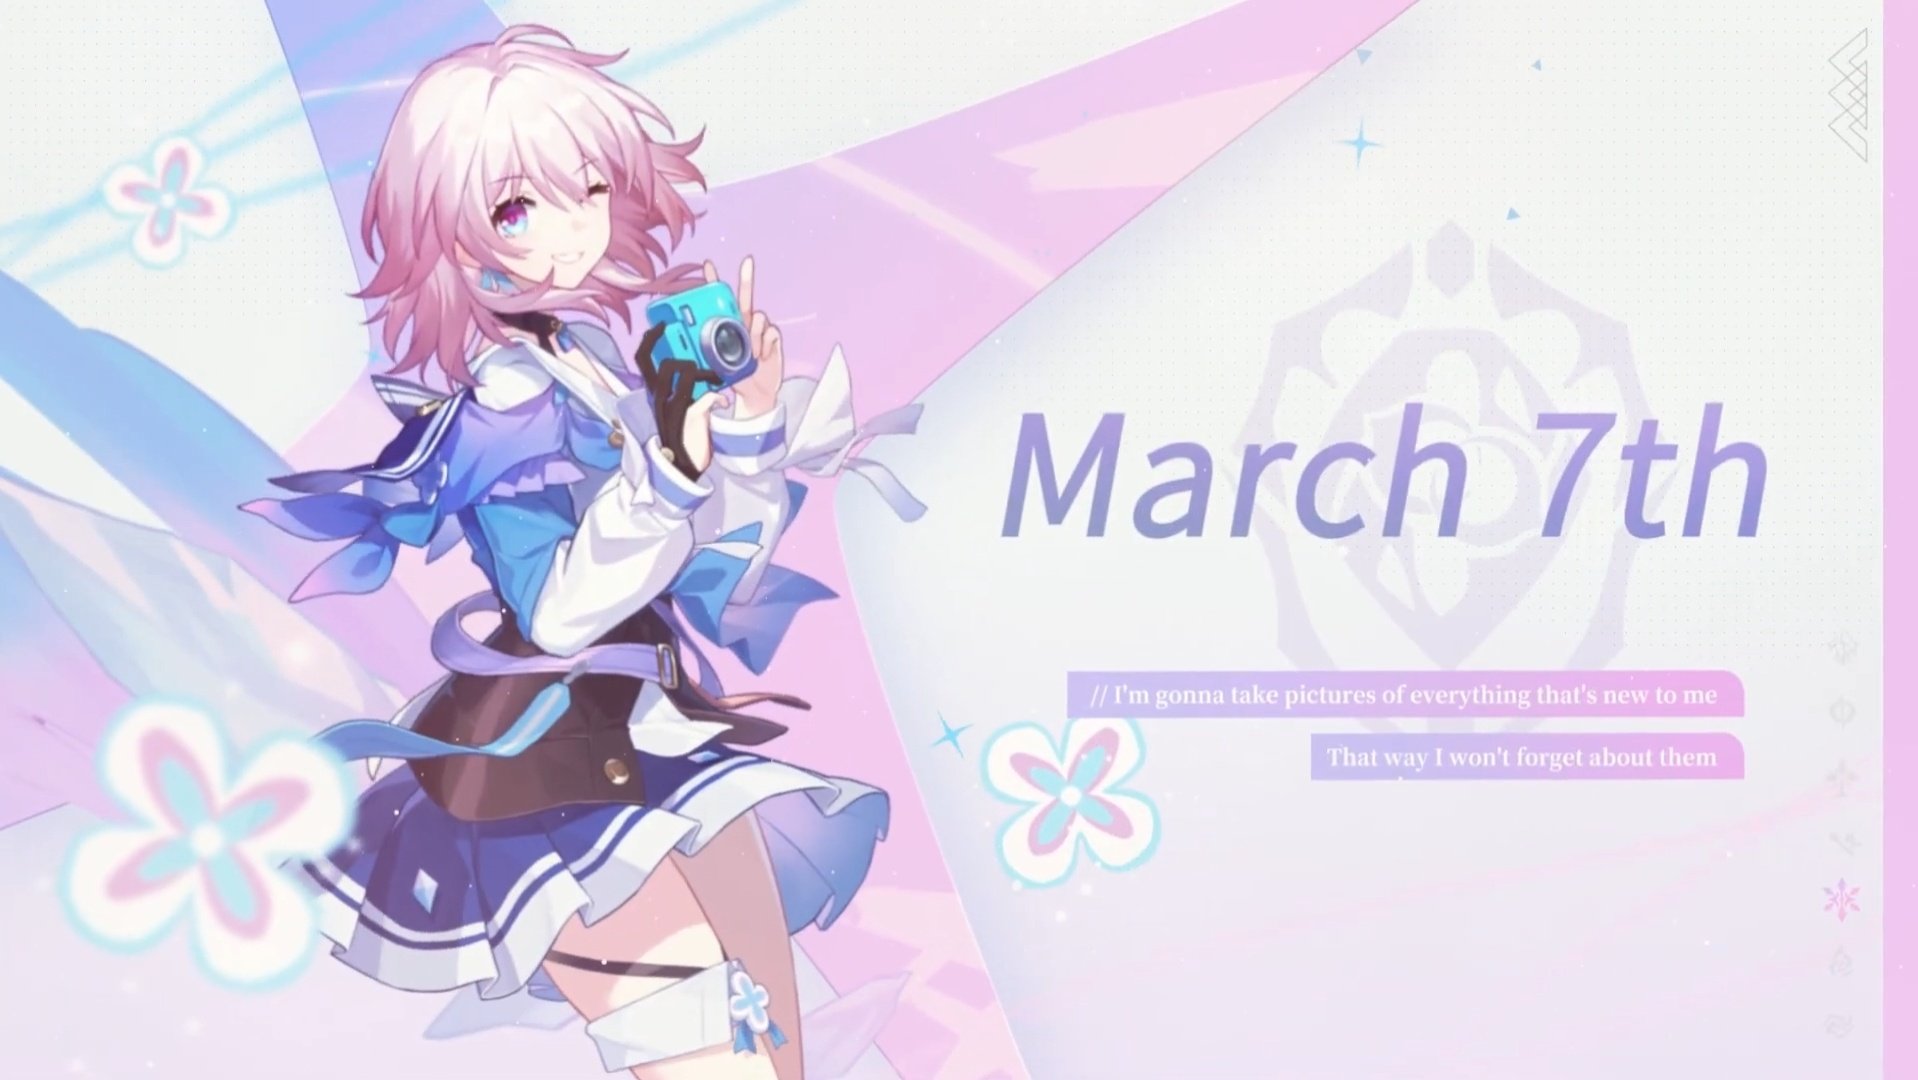 Daily Honkai: Star Rail UP WE HAVE MARCH 7TH'S TRAILER